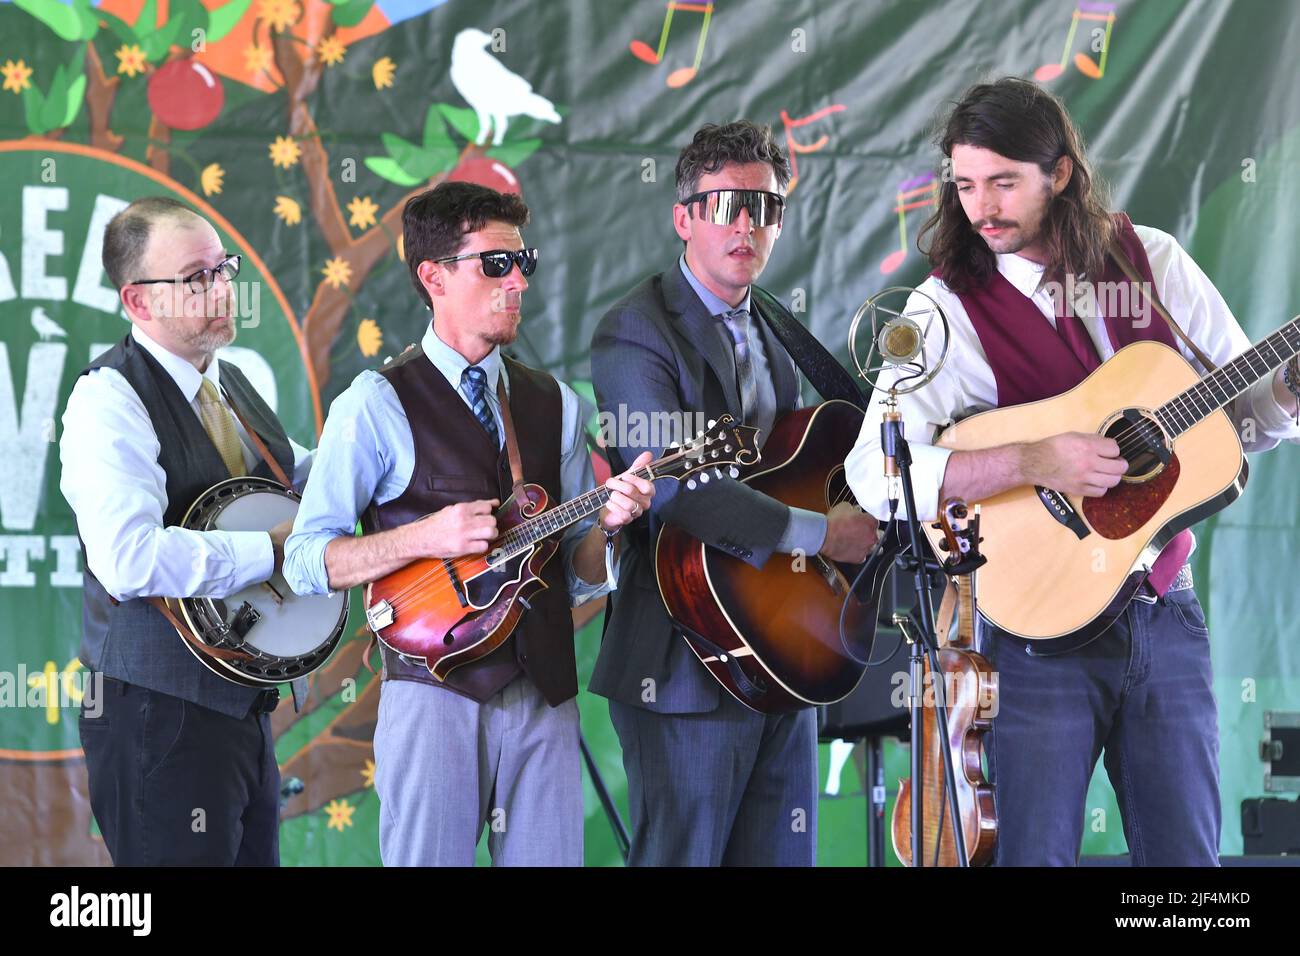 Band members of Poor Monroe, John Benjamin (mandolin), Eric Lee (guitar/fiddle), Sean Davis (guitar) are shown performing on stage during a “live” concert appearance at the Green River Festival. Stock Photo